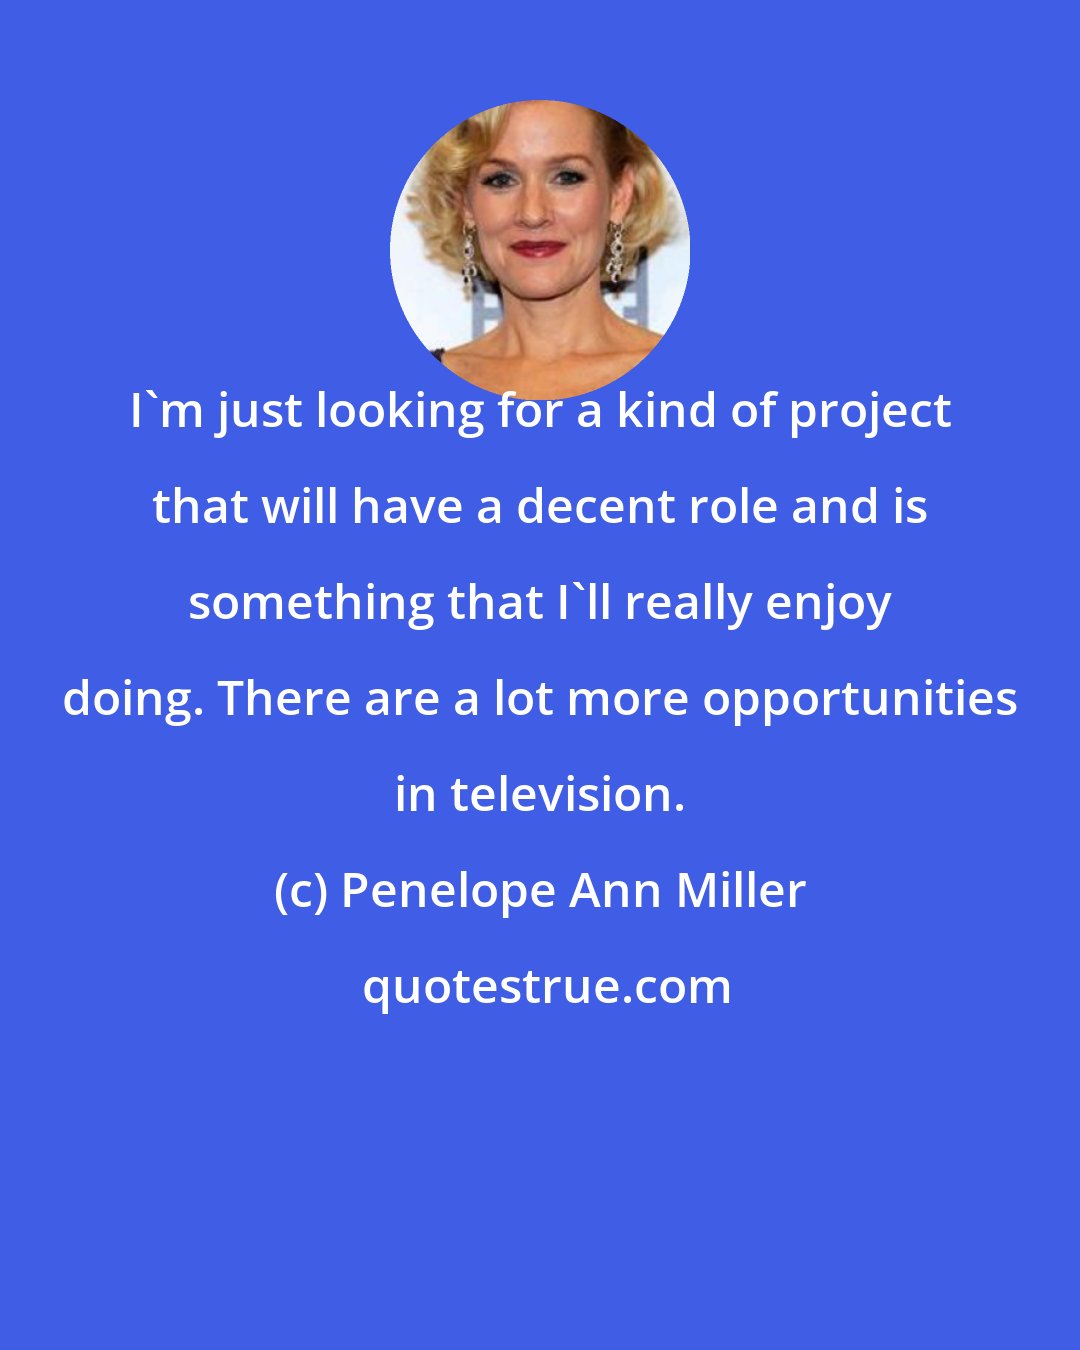 Penelope Ann Miller: I'm just looking for a kind of project that will have a decent role and is something that I'll really enjoy doing. There are a lot more opportunities in television.